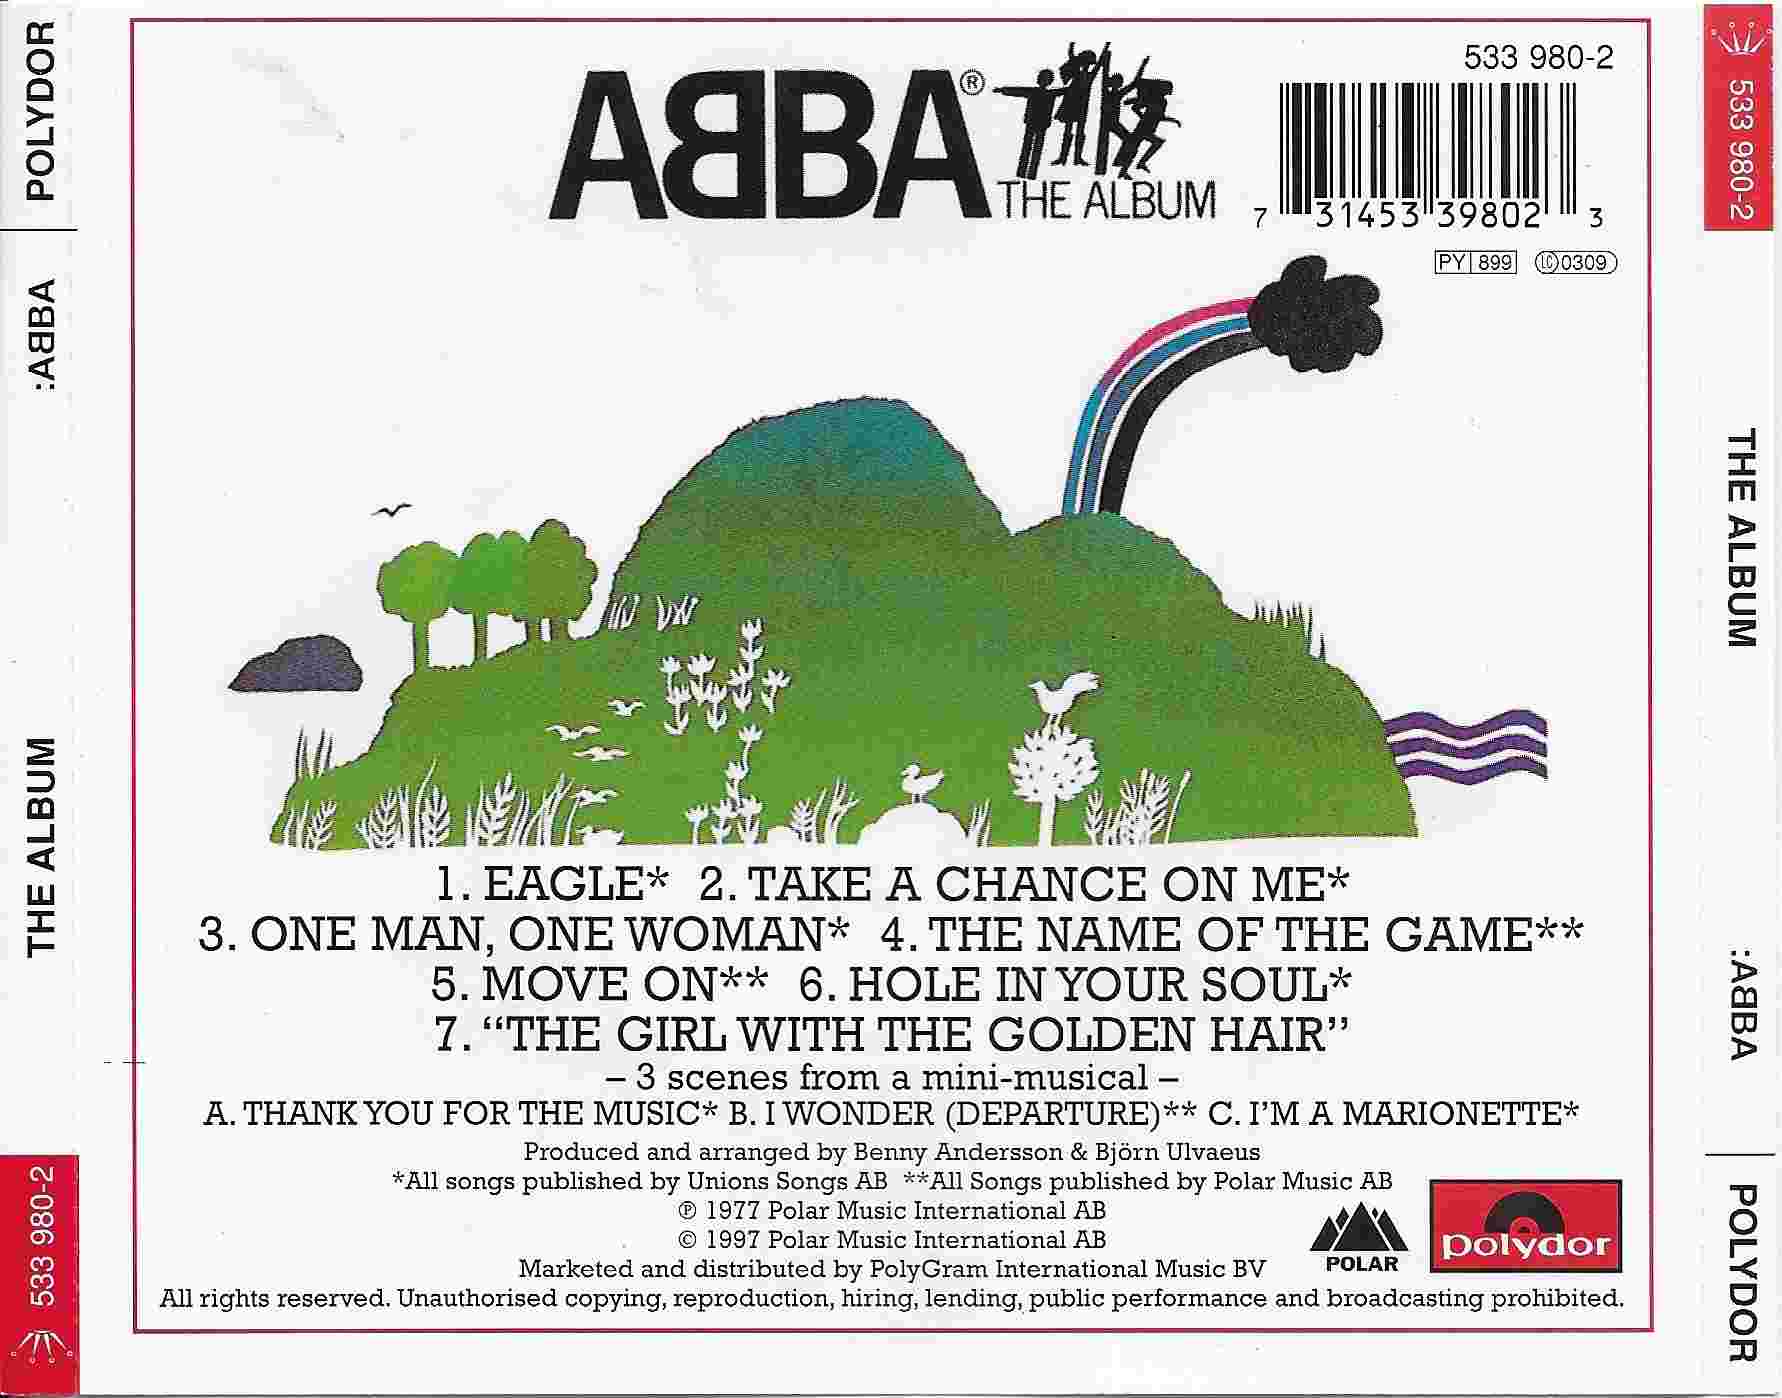 Picture of 533980 - 2 Abba - The album by artist Abba  